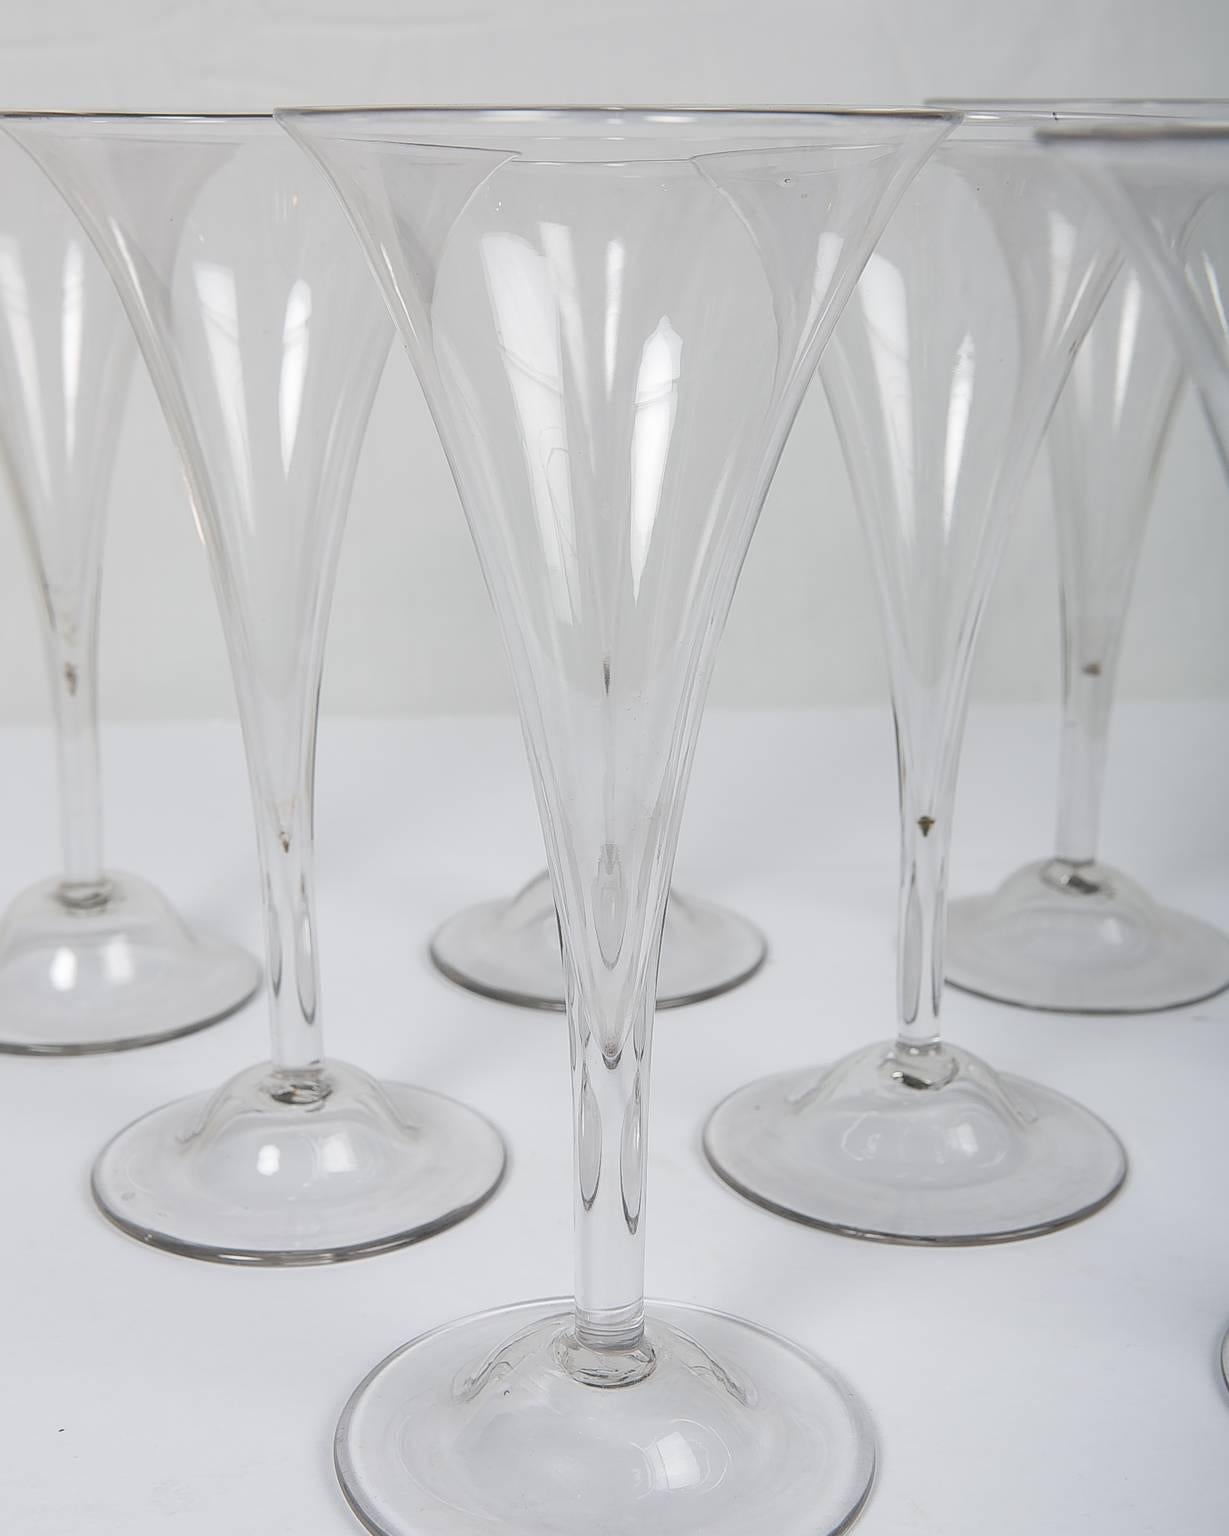 Hand-Crafted Ten Large Antique Champagne Flutes Hand-Blown Glass England 18th Century c-1760 For Sale